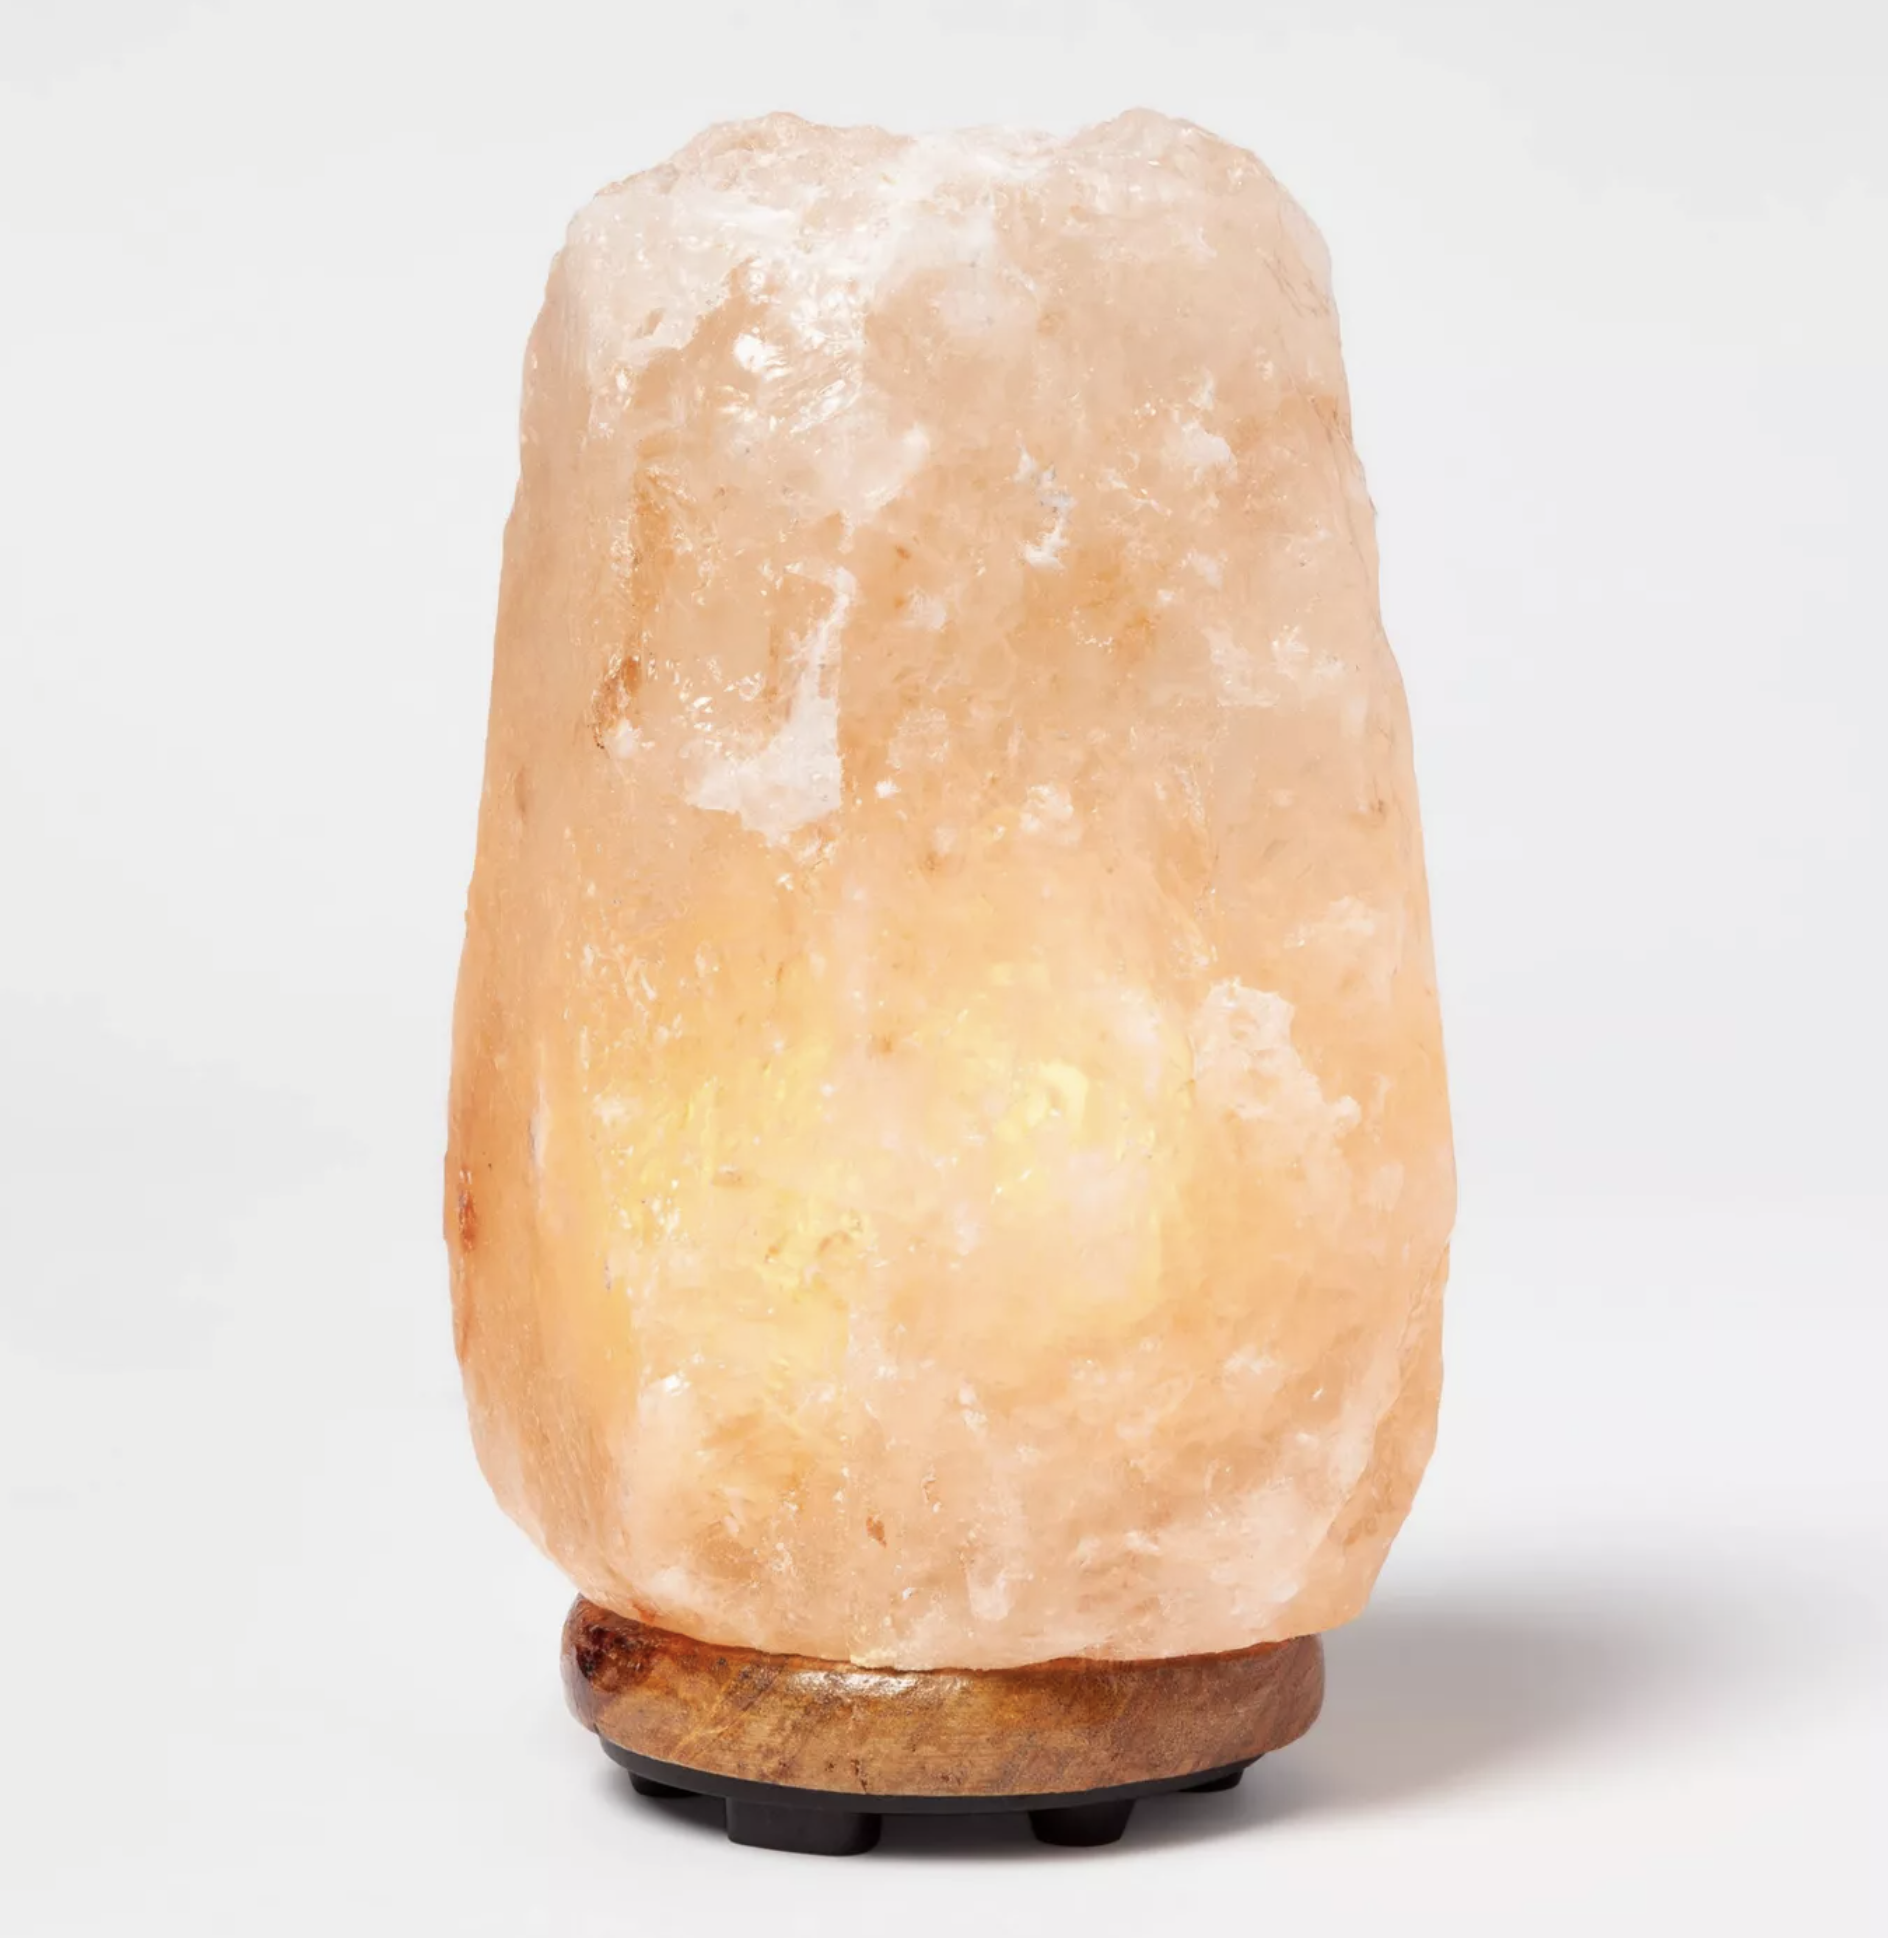 the Himalayan salt lamp which has a wooden base